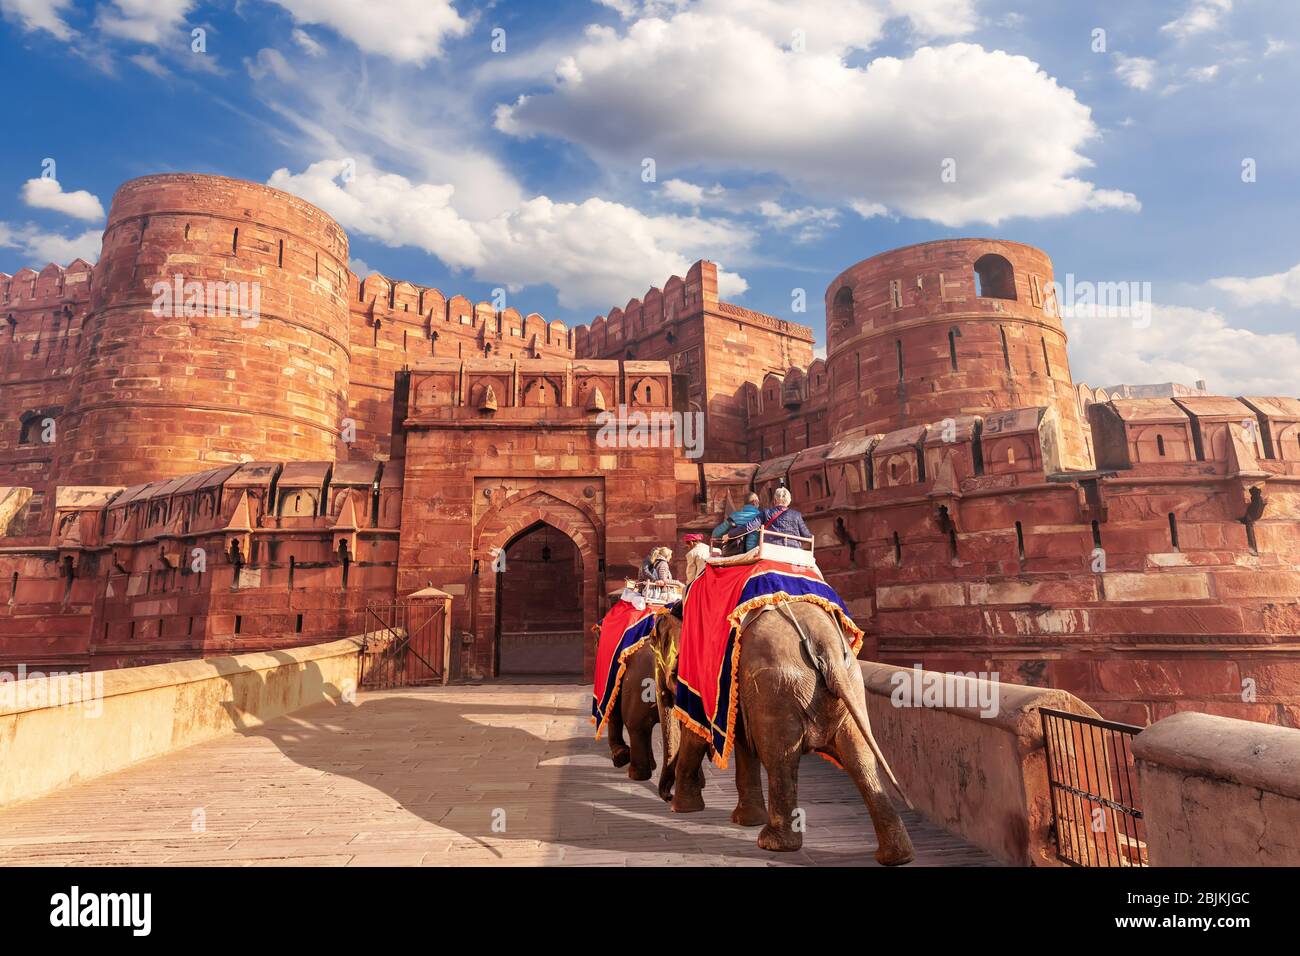 Agra Fort and elephants, view of India. Stock Photo